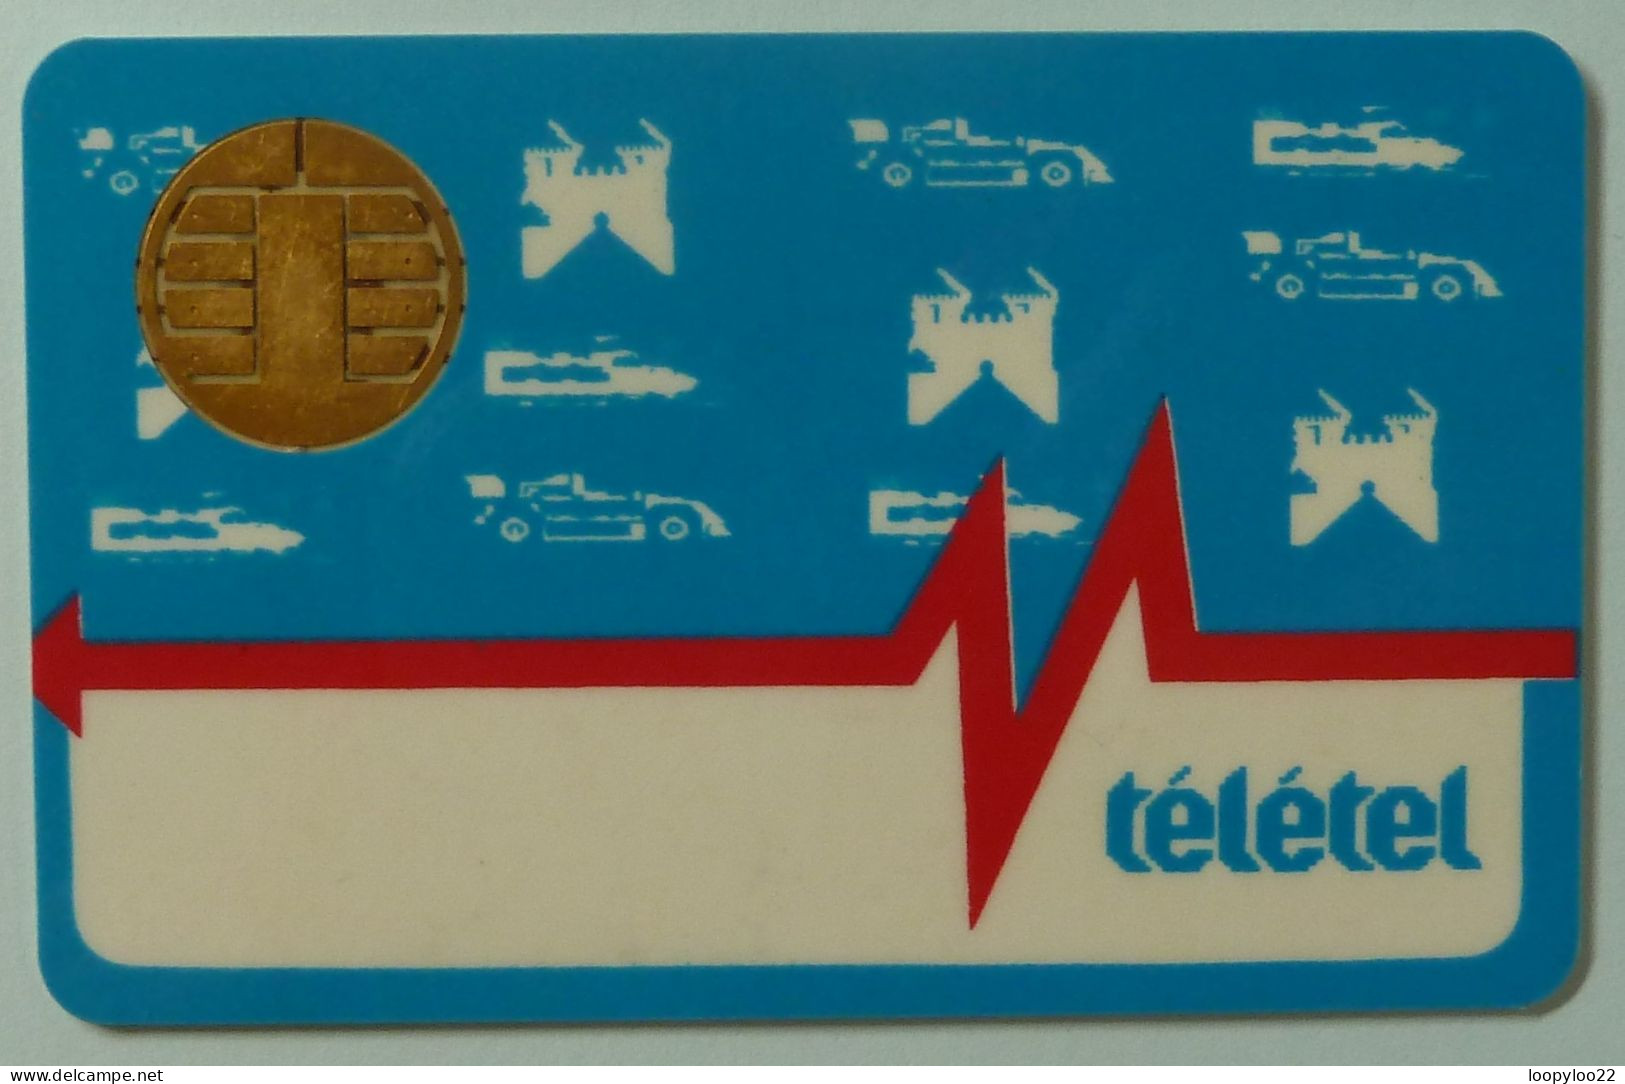 FRANCE - Bull Chip - Teletel - Smartcard - EPTPOS - 1985 - Used - Phonecards: Private Use